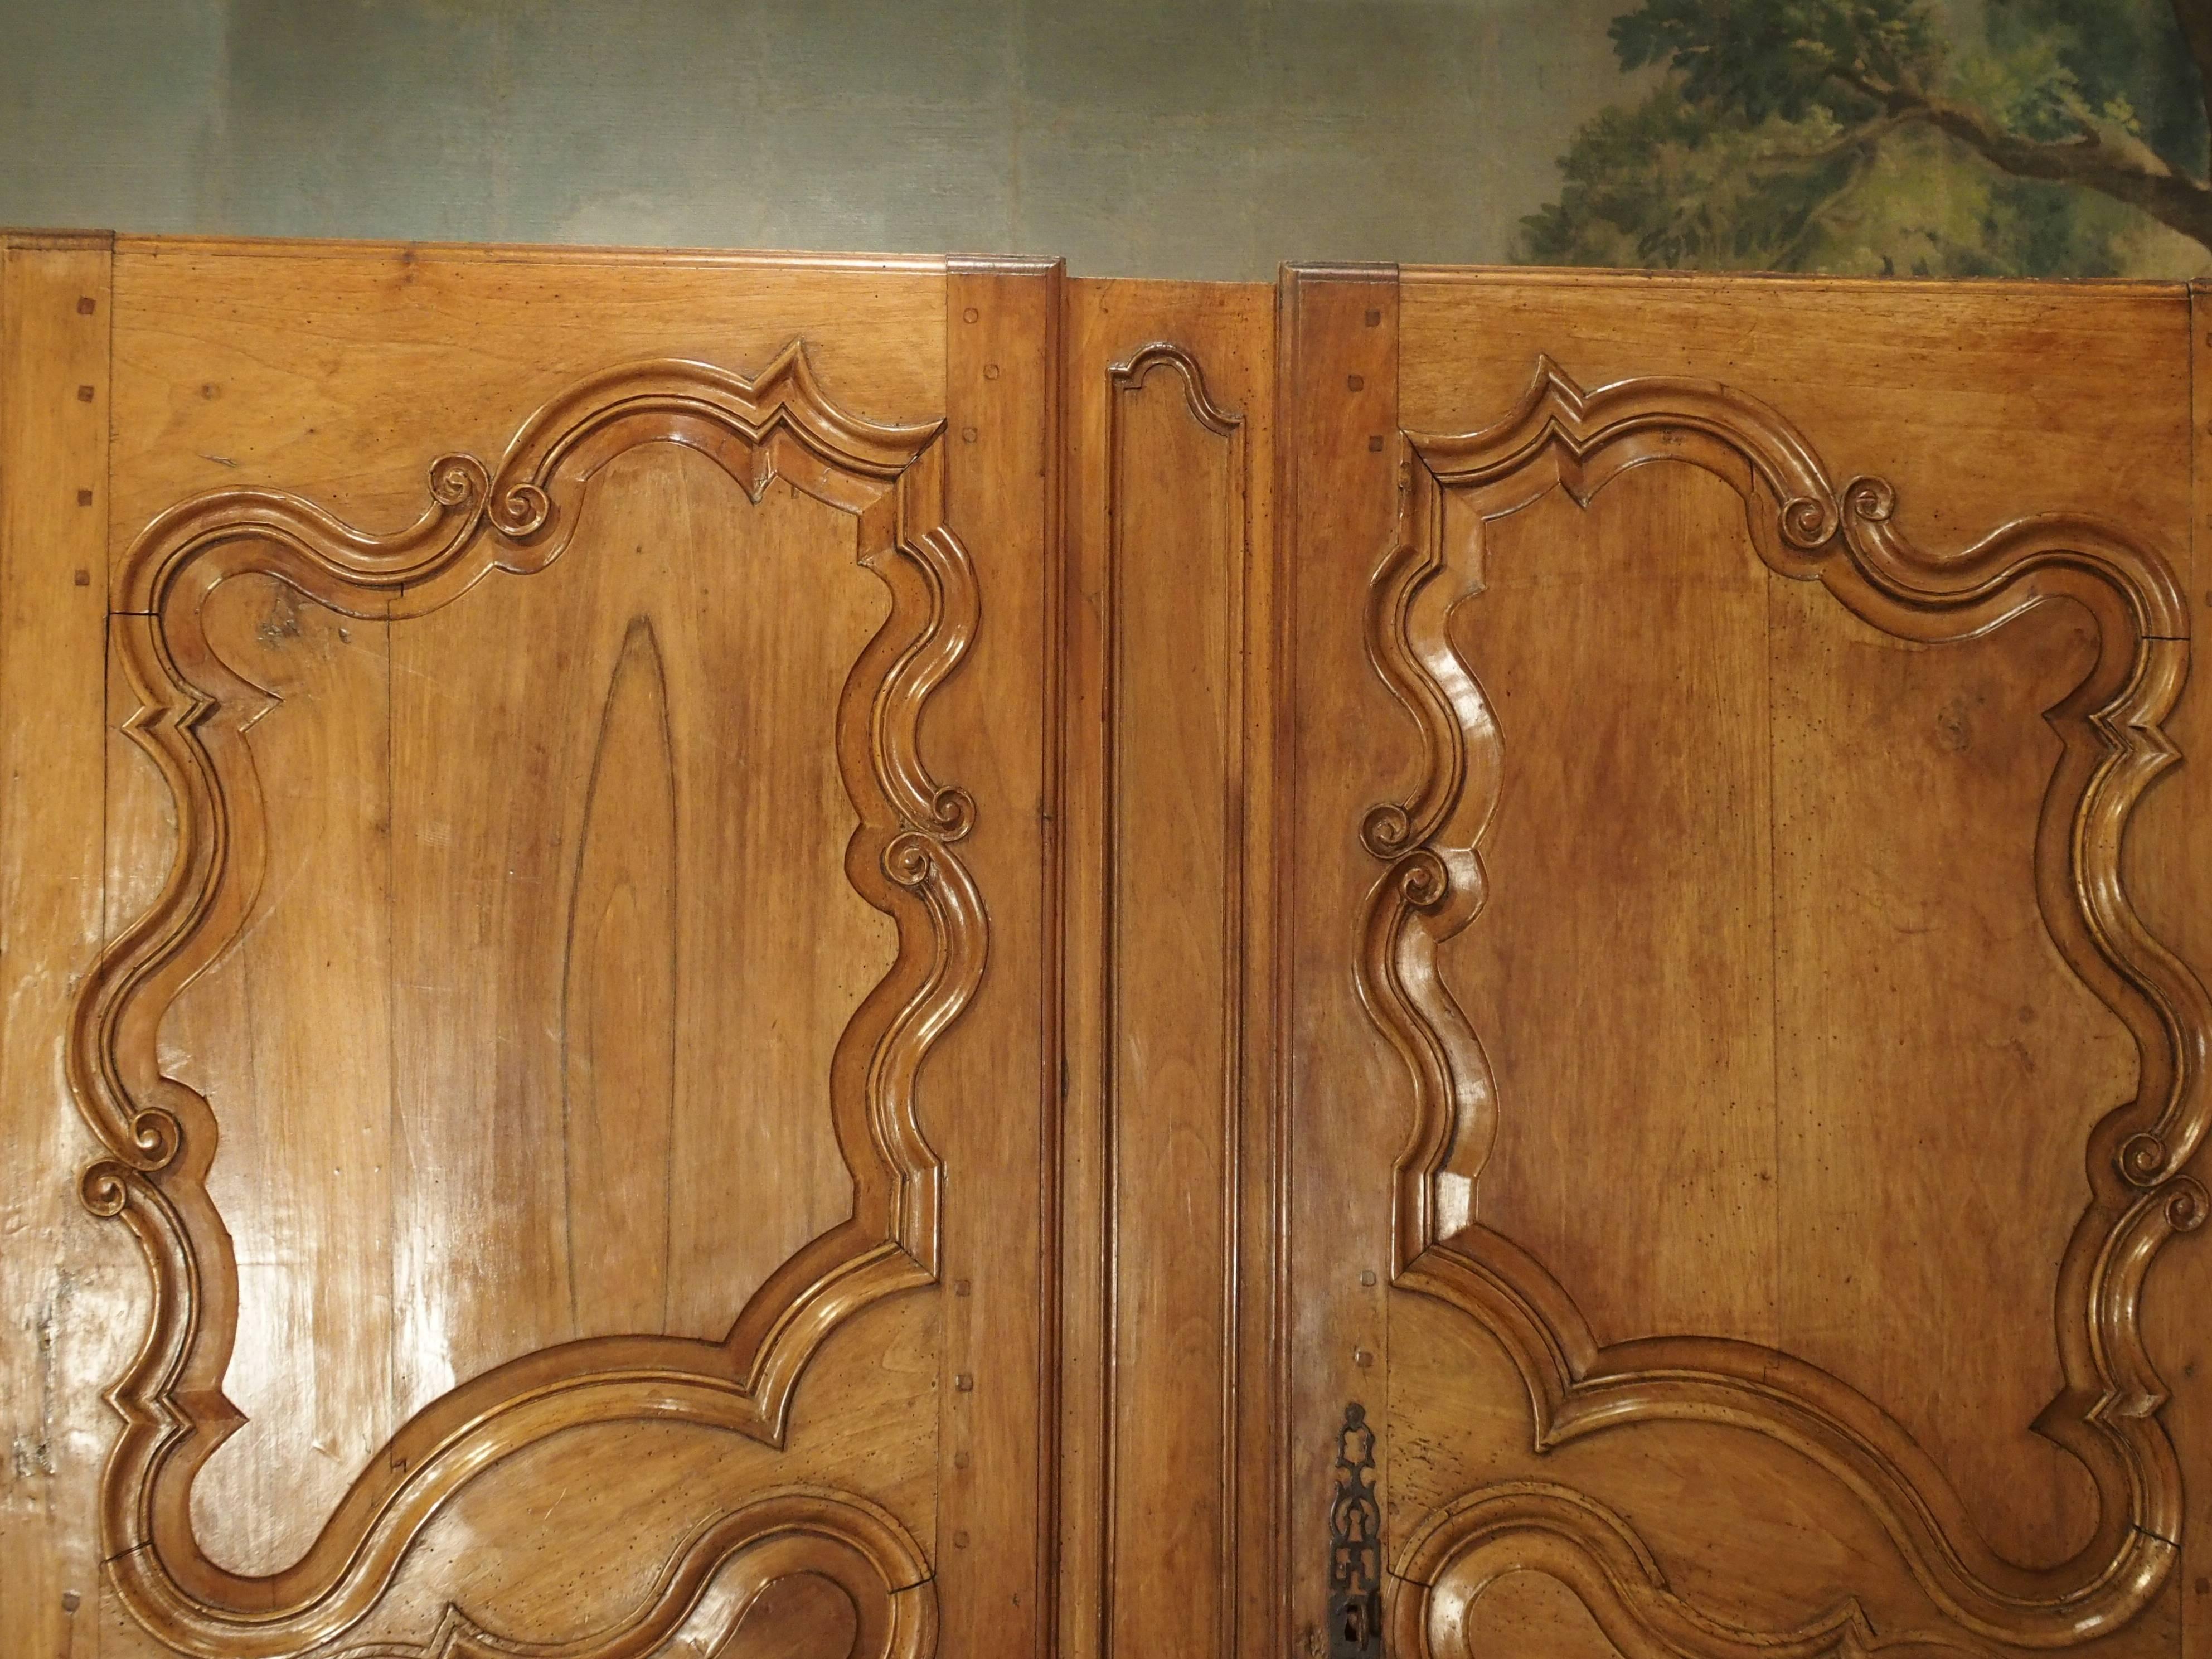 These elegant and refined armoire doors come from Arles, France. They once graced a beautiful armoire that was made in the 1700s. Their ornamentation on the three raised beveled panels, consists of linear C and S scrolls, and asymmetrical outlines